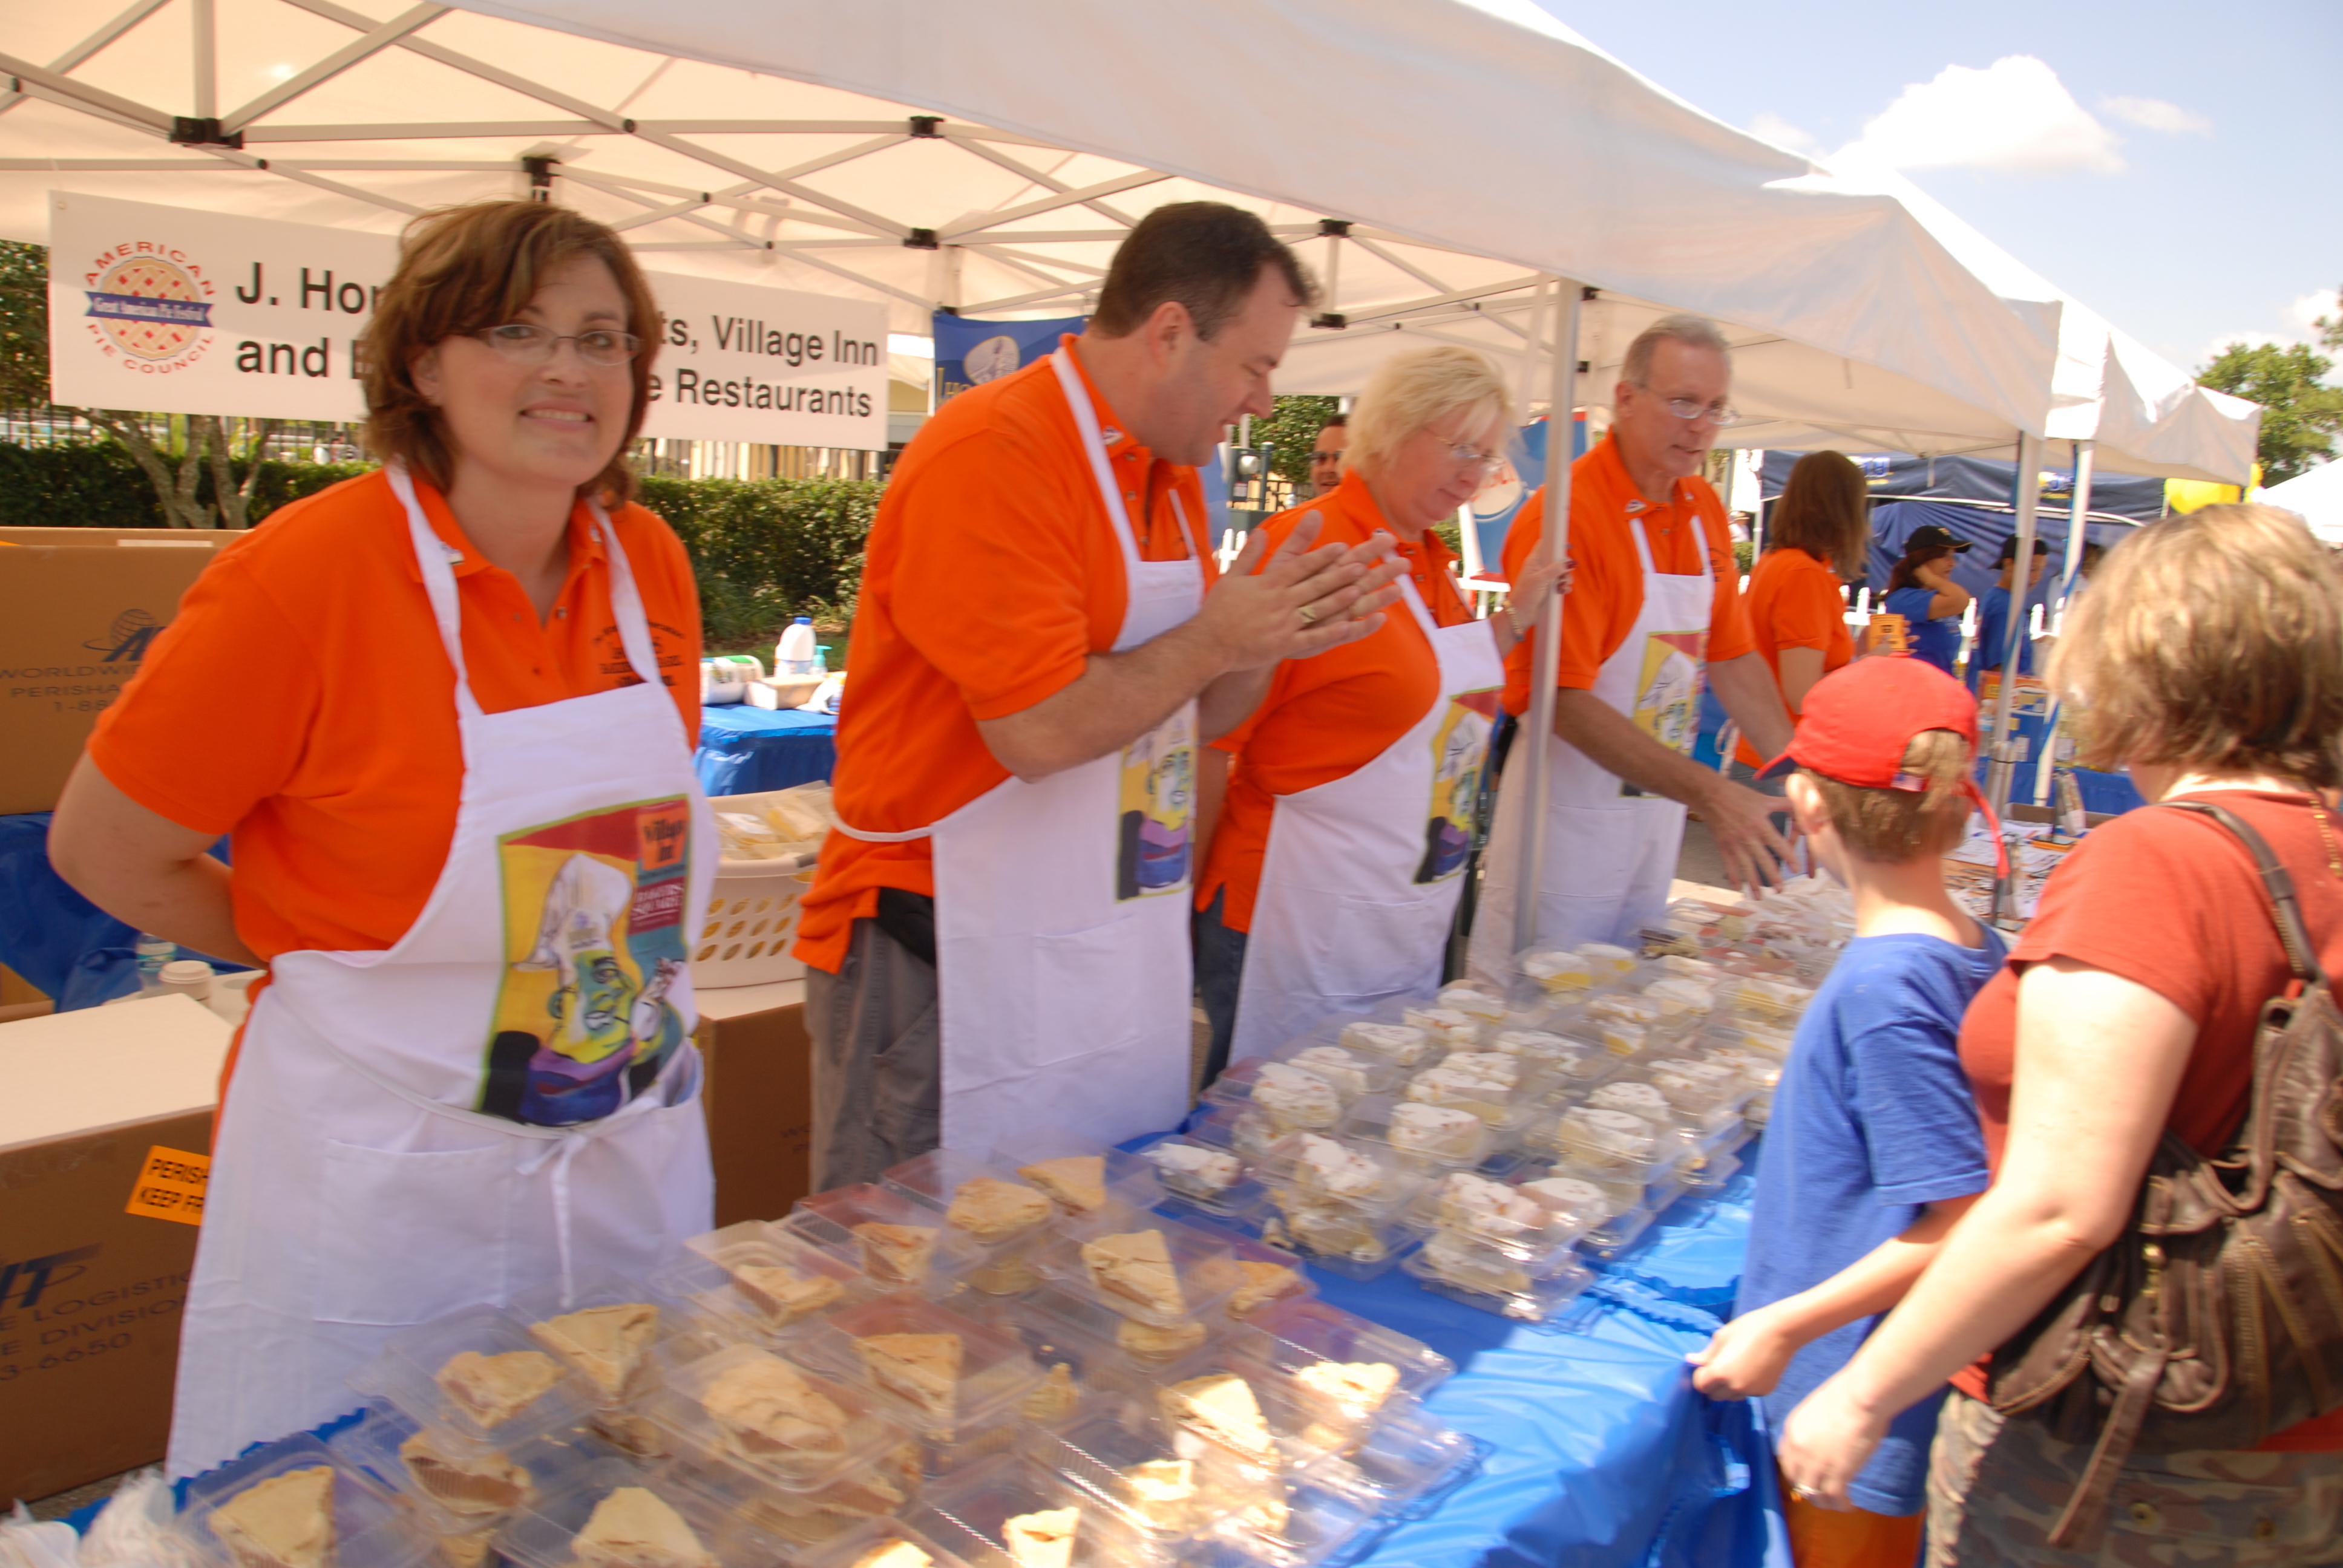 20th Annual APC National Pie Championships – Calling all Bakers and Pie Fans